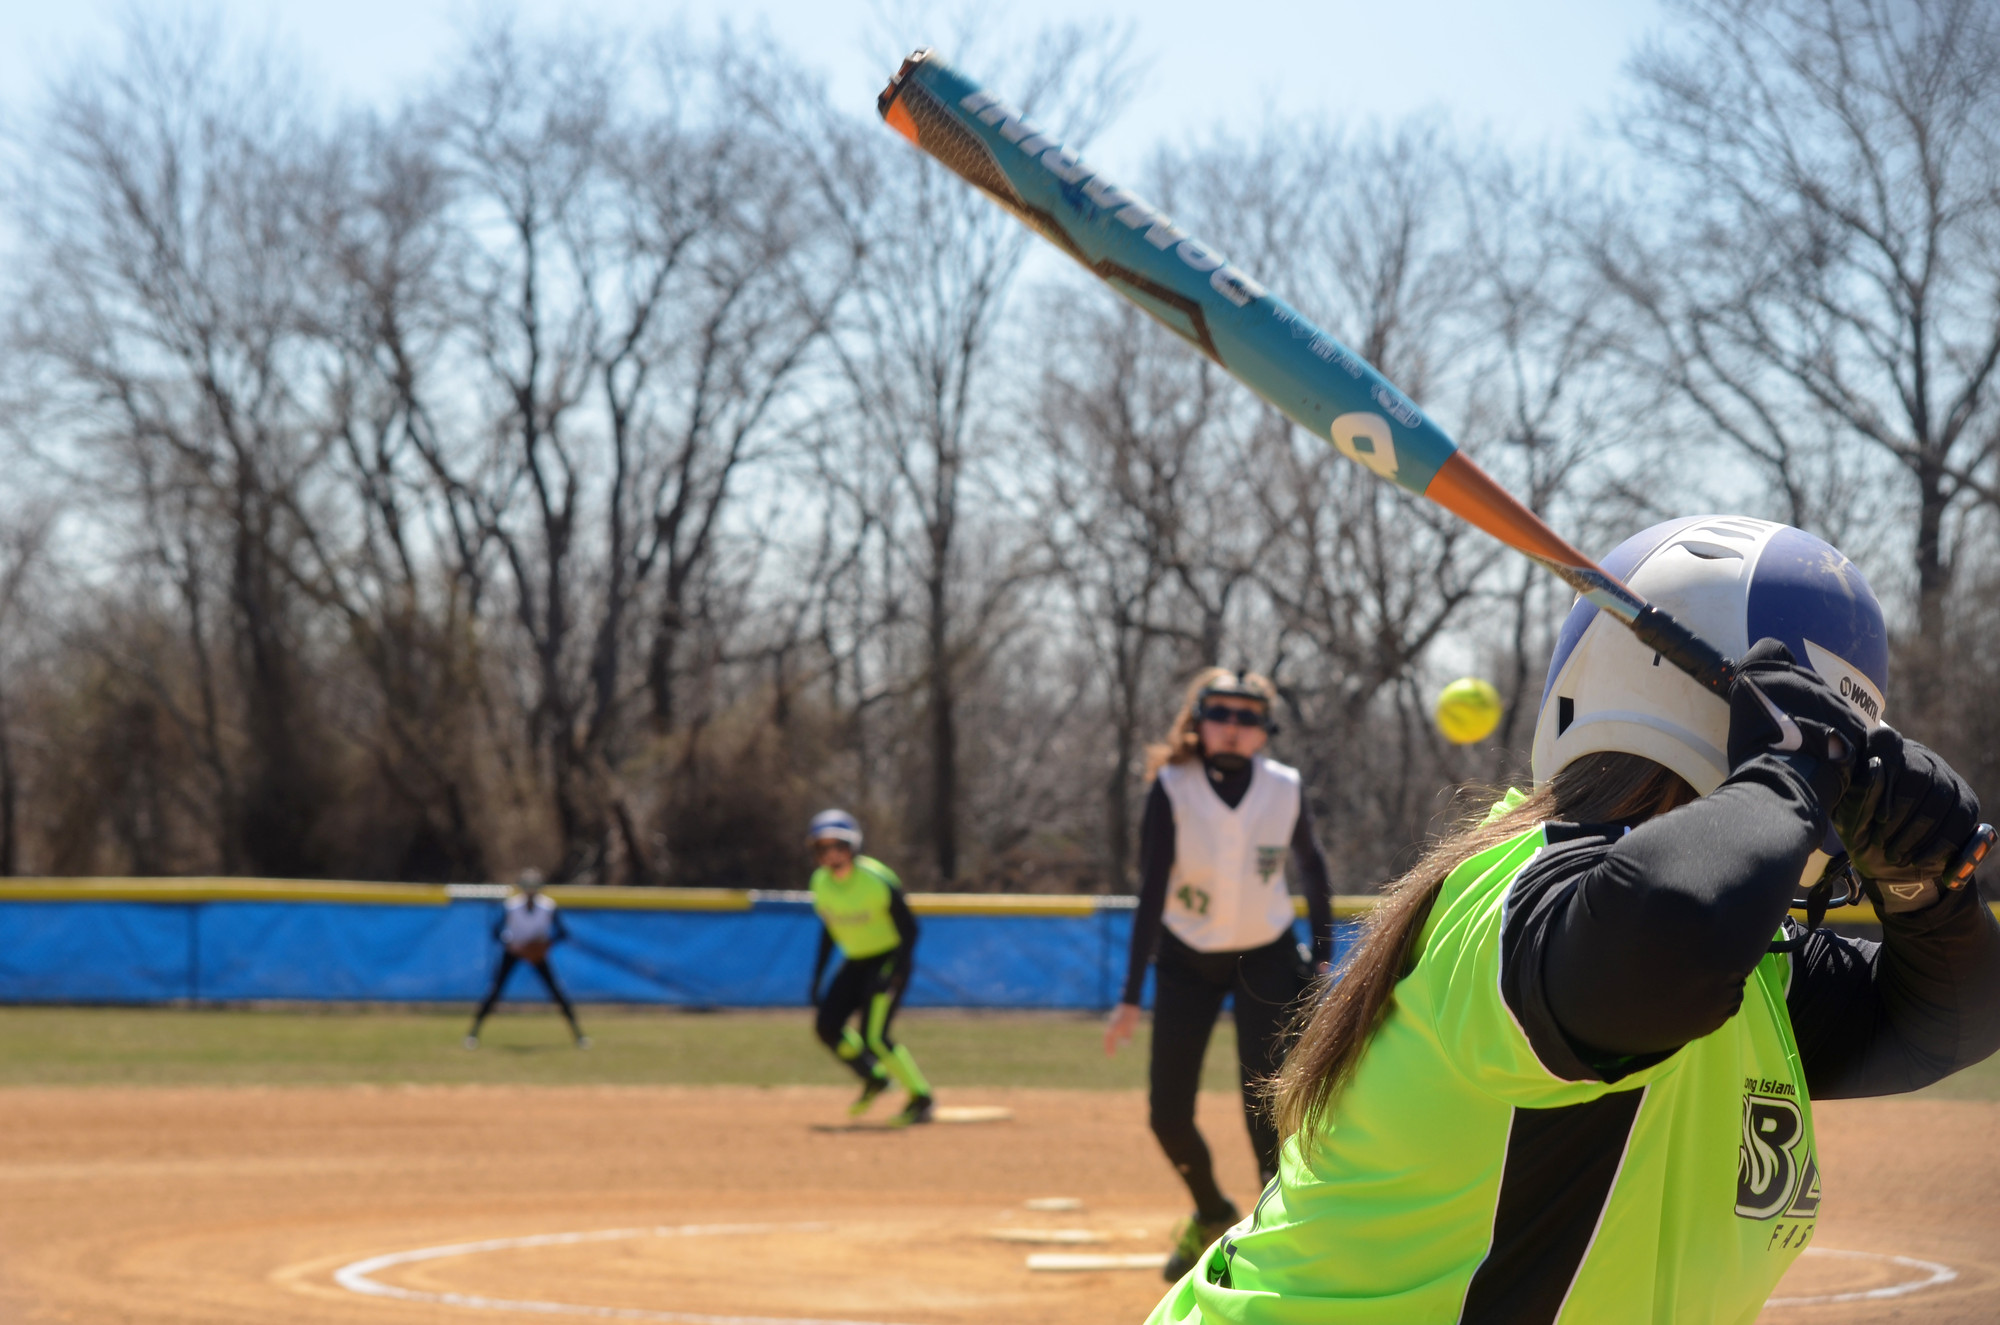 Sydney Inge awaited a pitch from Emily Haller last Sunday during the East Meadow Baseball Softball Association’s opening weekend.